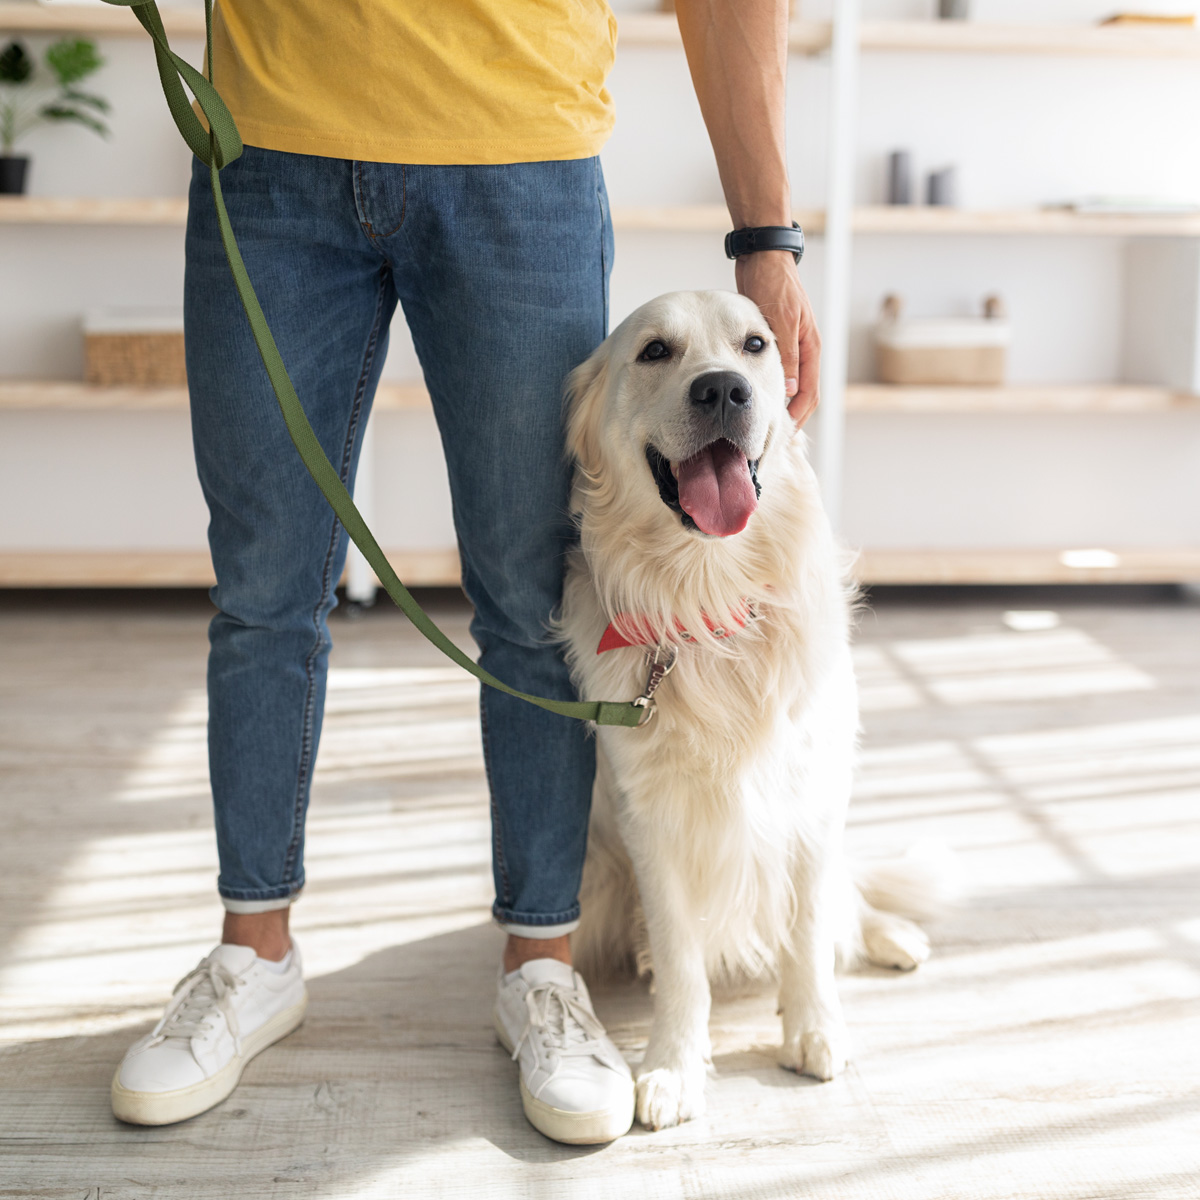 11 Best Dog Walking Apps: Get Paid To Walk Dogs